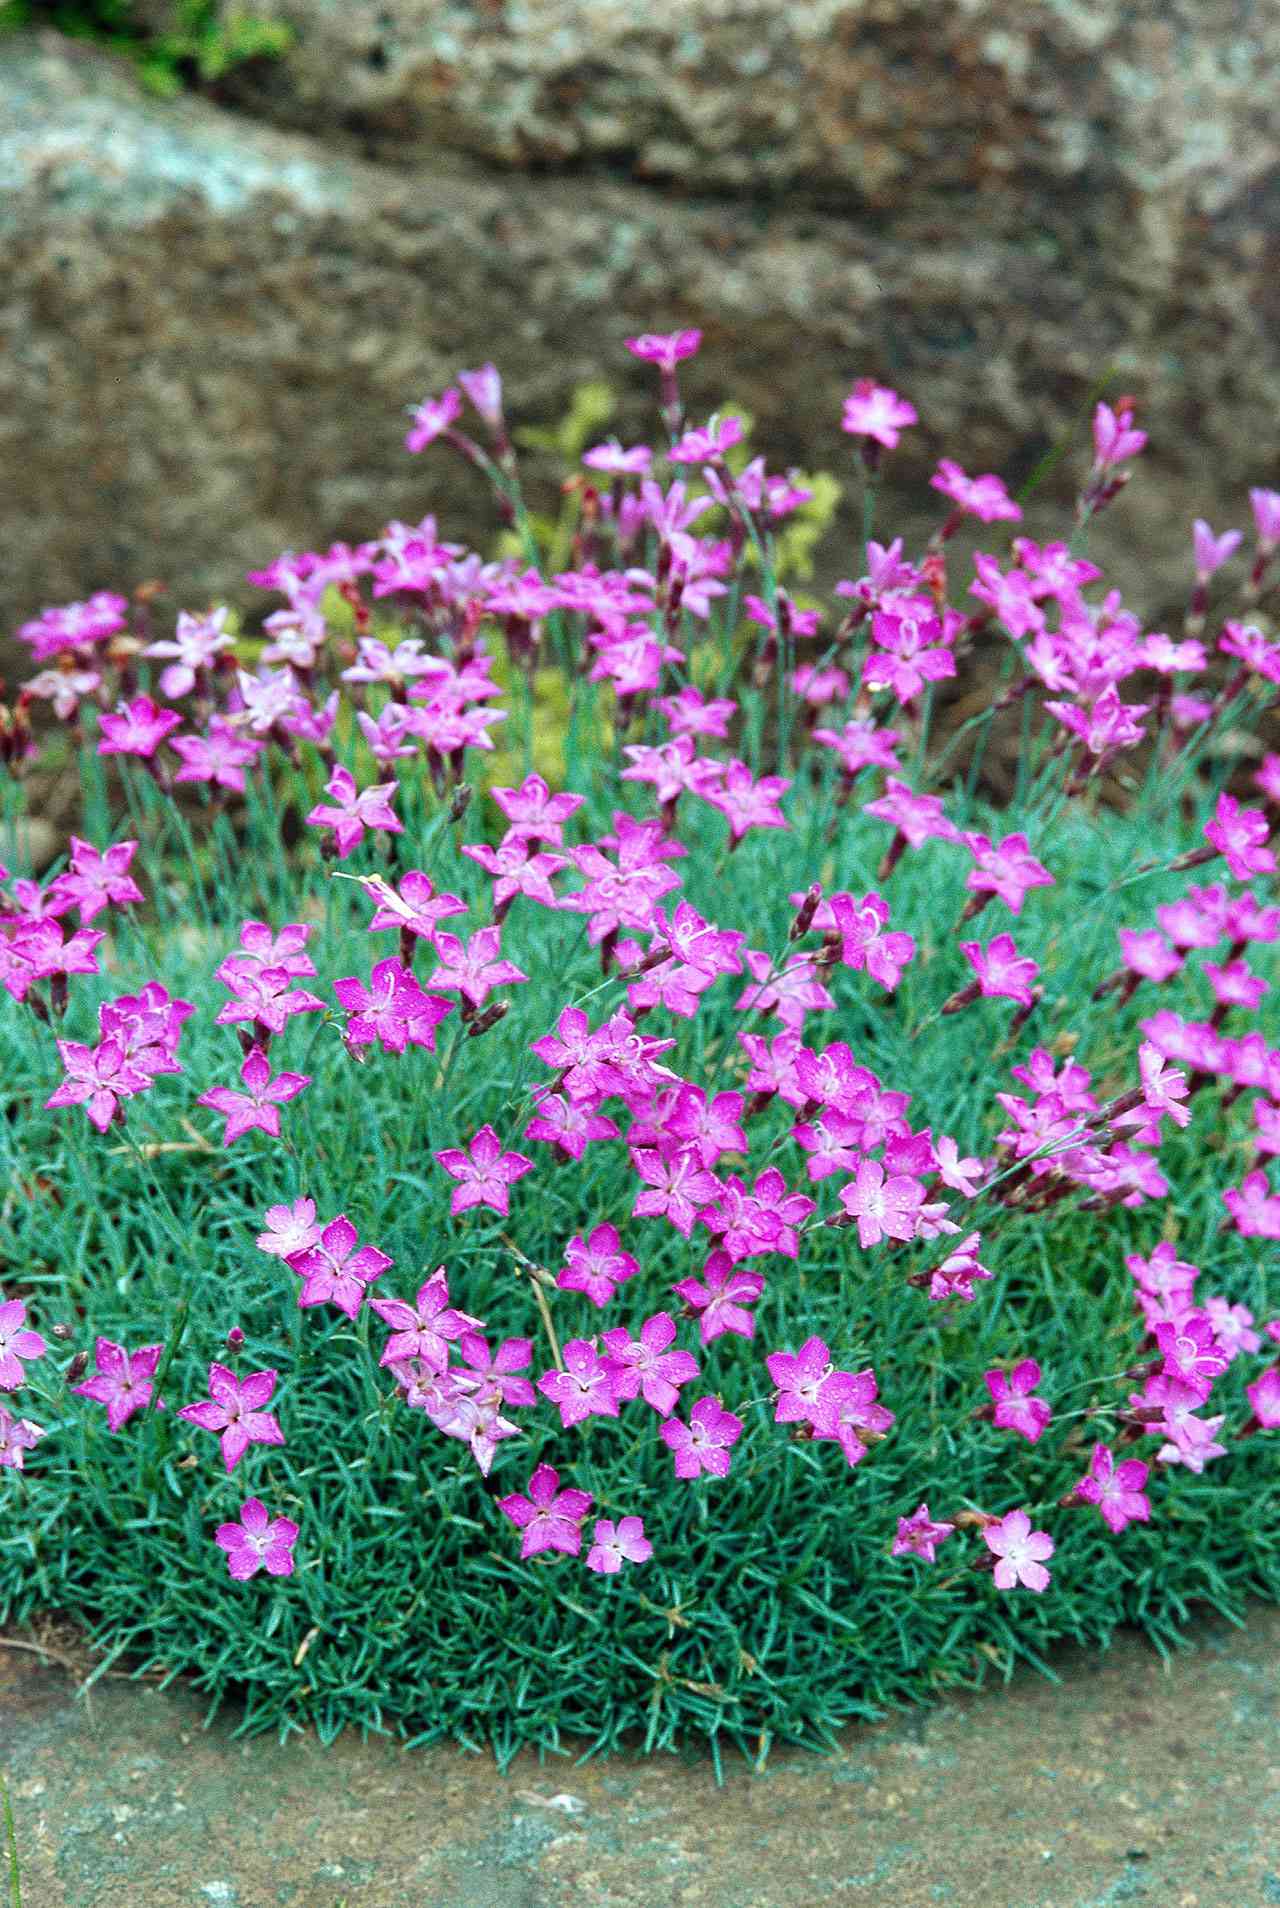 Drought Tolerant Groundcovers Better, Pink Ground Cover